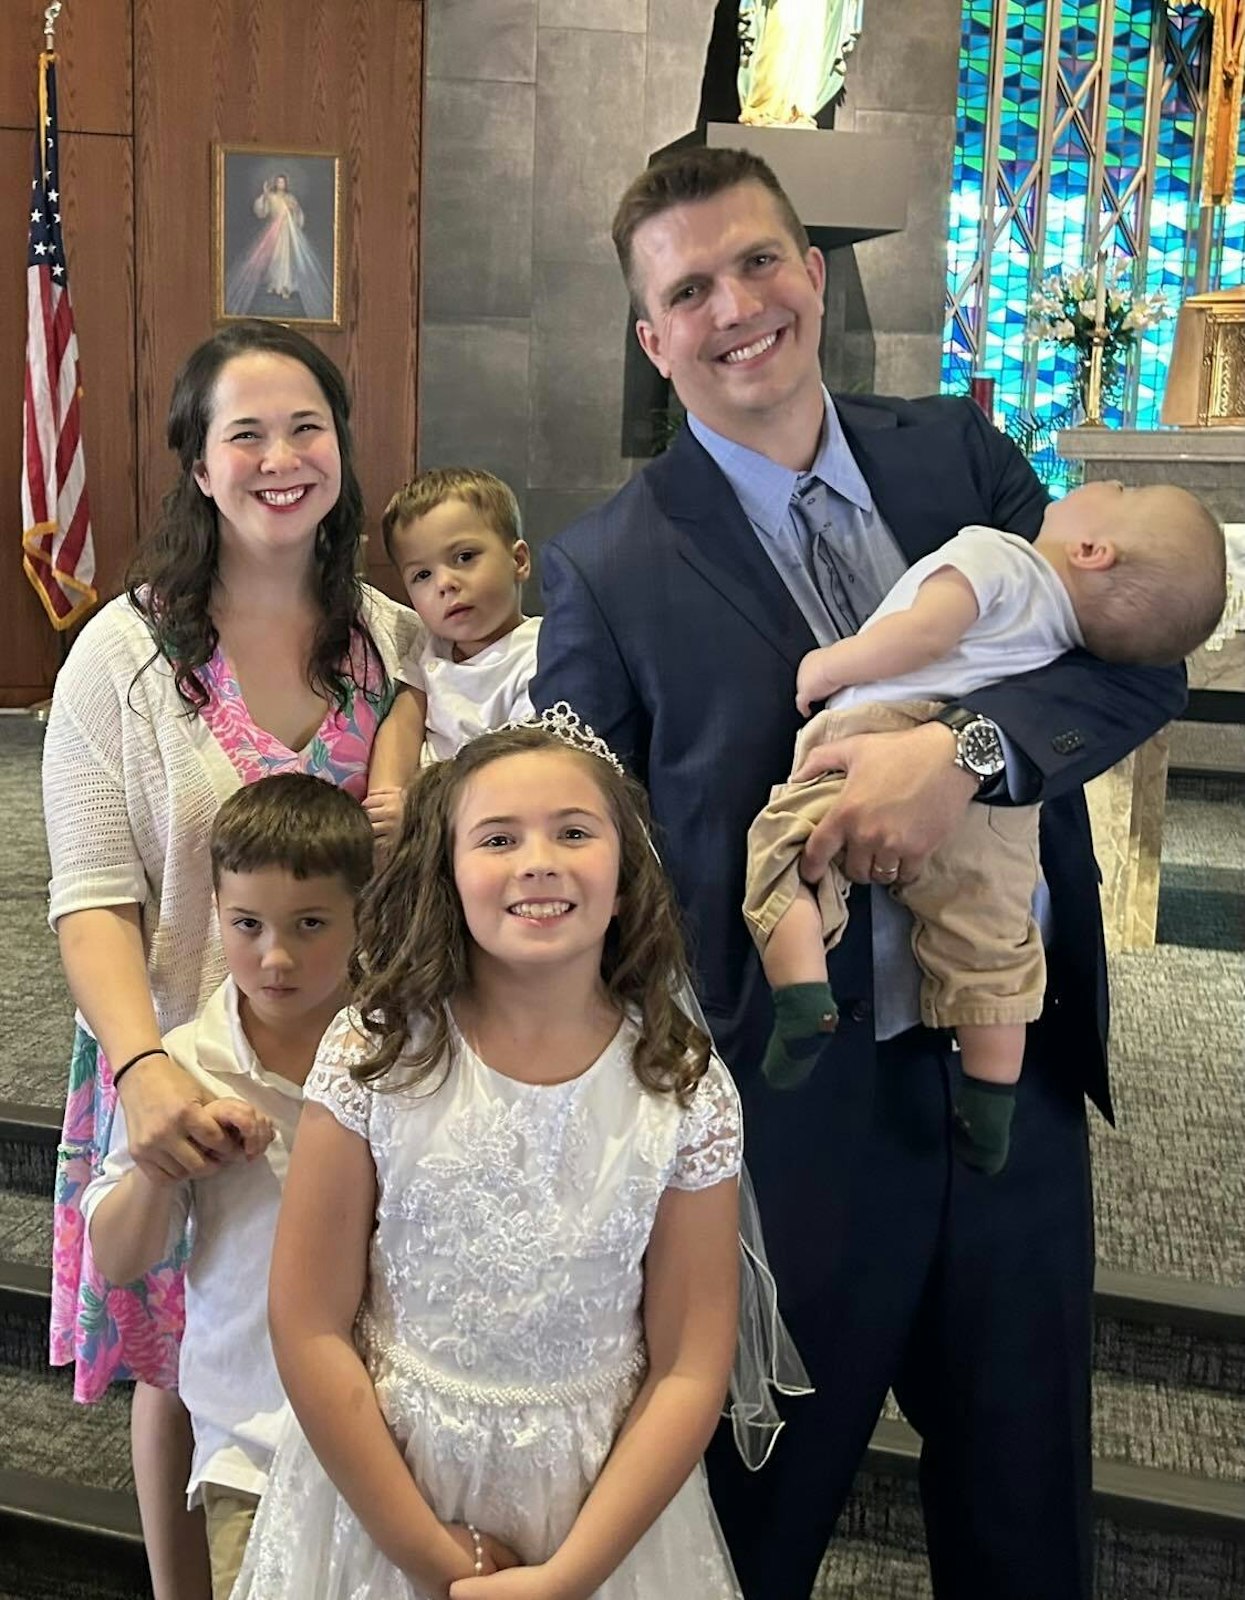 Lisa Kilijanczyk, pictured with her husband and four children, said she and her husband talked and prayed about baby names, even while dating, but since having their children, they’ve seen how God really was the one to choose their names. (Photo courtesy of Lisa Kilijanczyk)